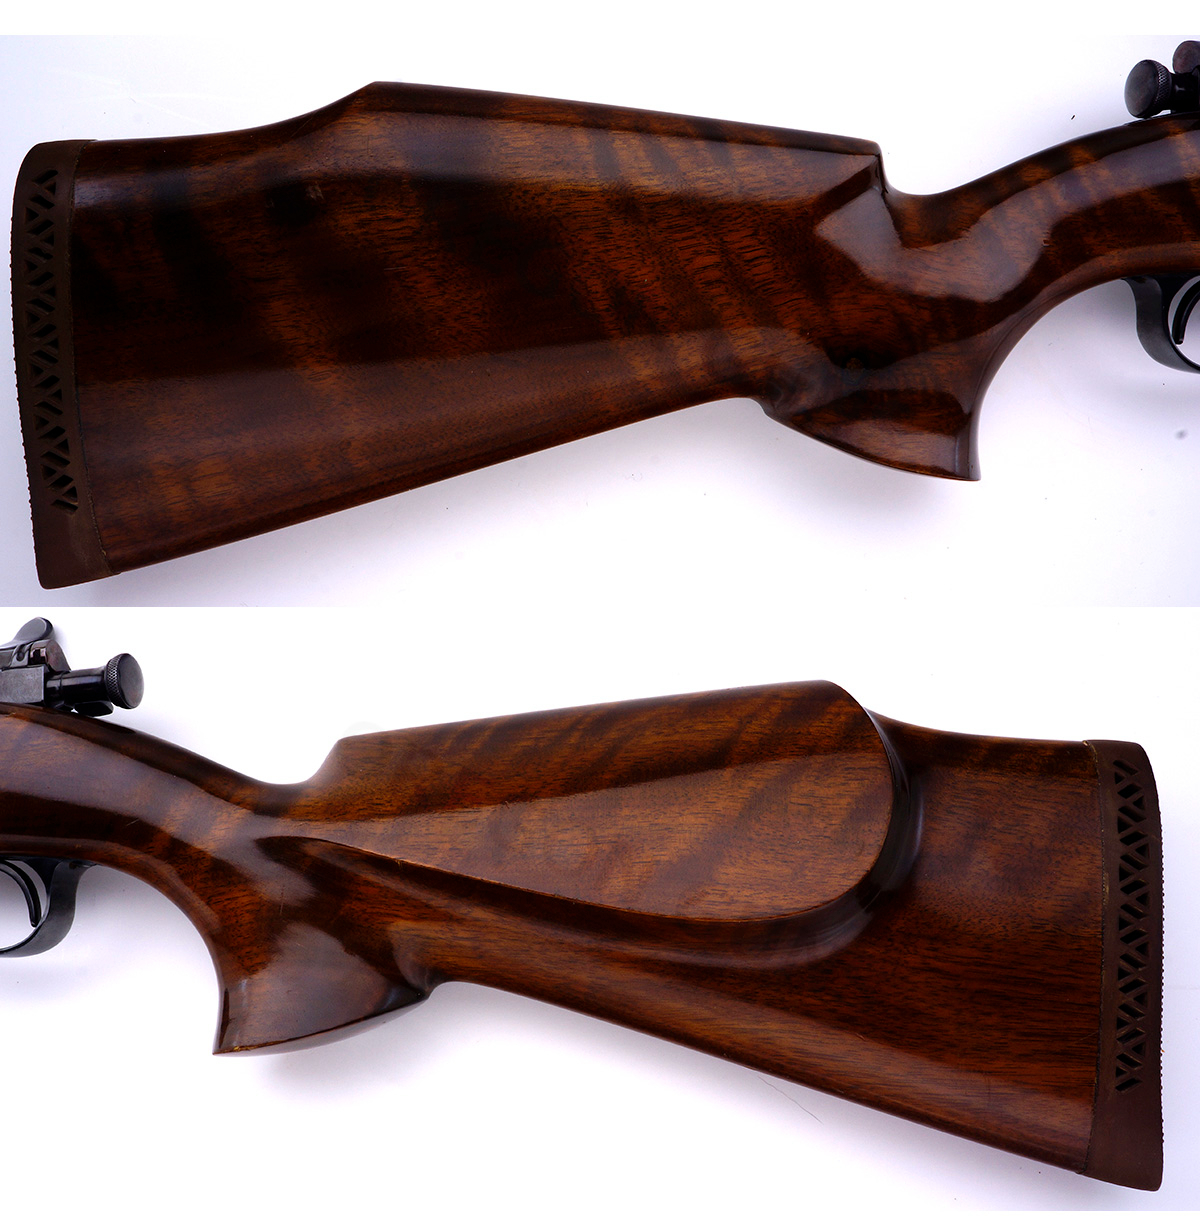 Carcano GARDONE VAL TROMPIA 91/28 BOLT RIFLE 1934-XII 6.5x57mm MAUSER C&R OK SN# L3418 6.5x57 Mauser - Picture 5